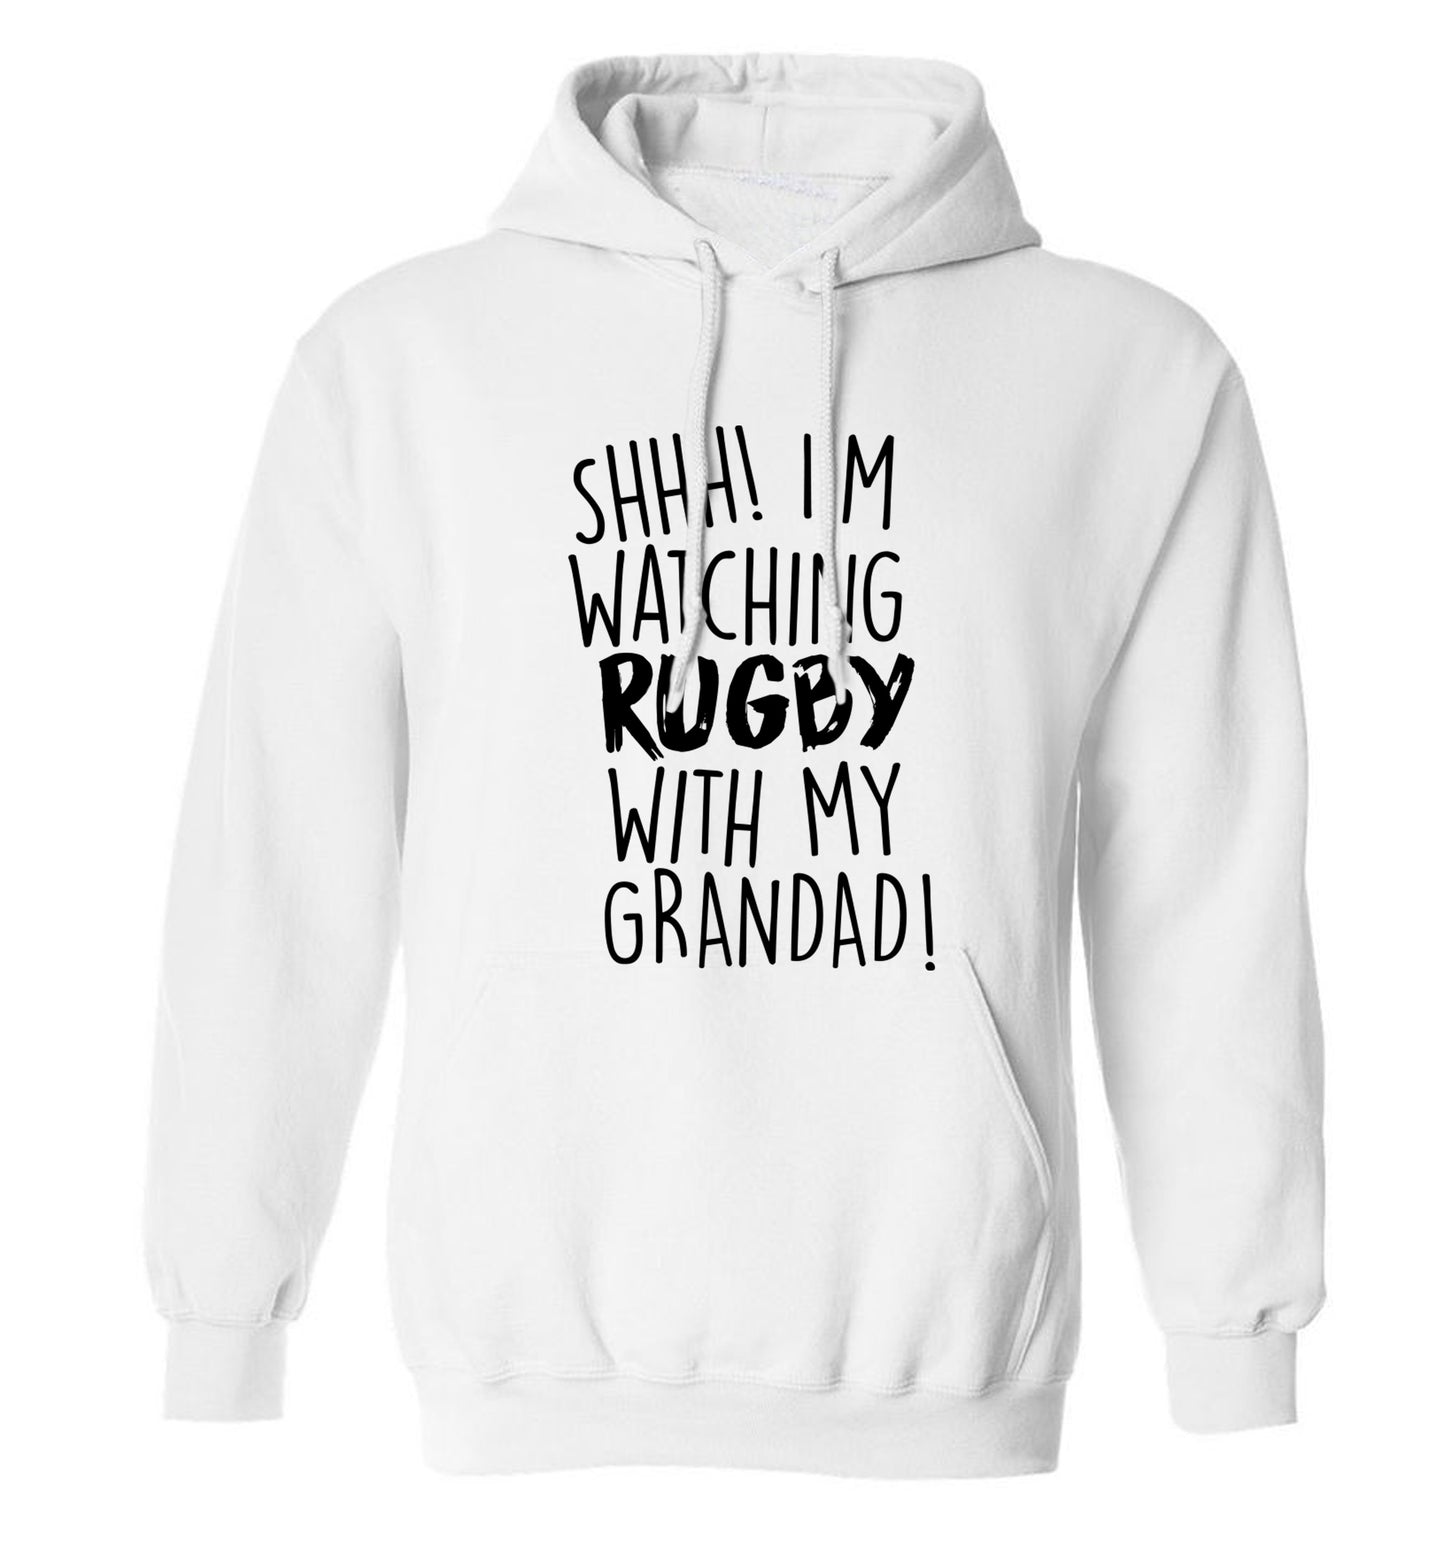 Shh I'm watching rugby with my grandad adults unisex white hoodie 2XL